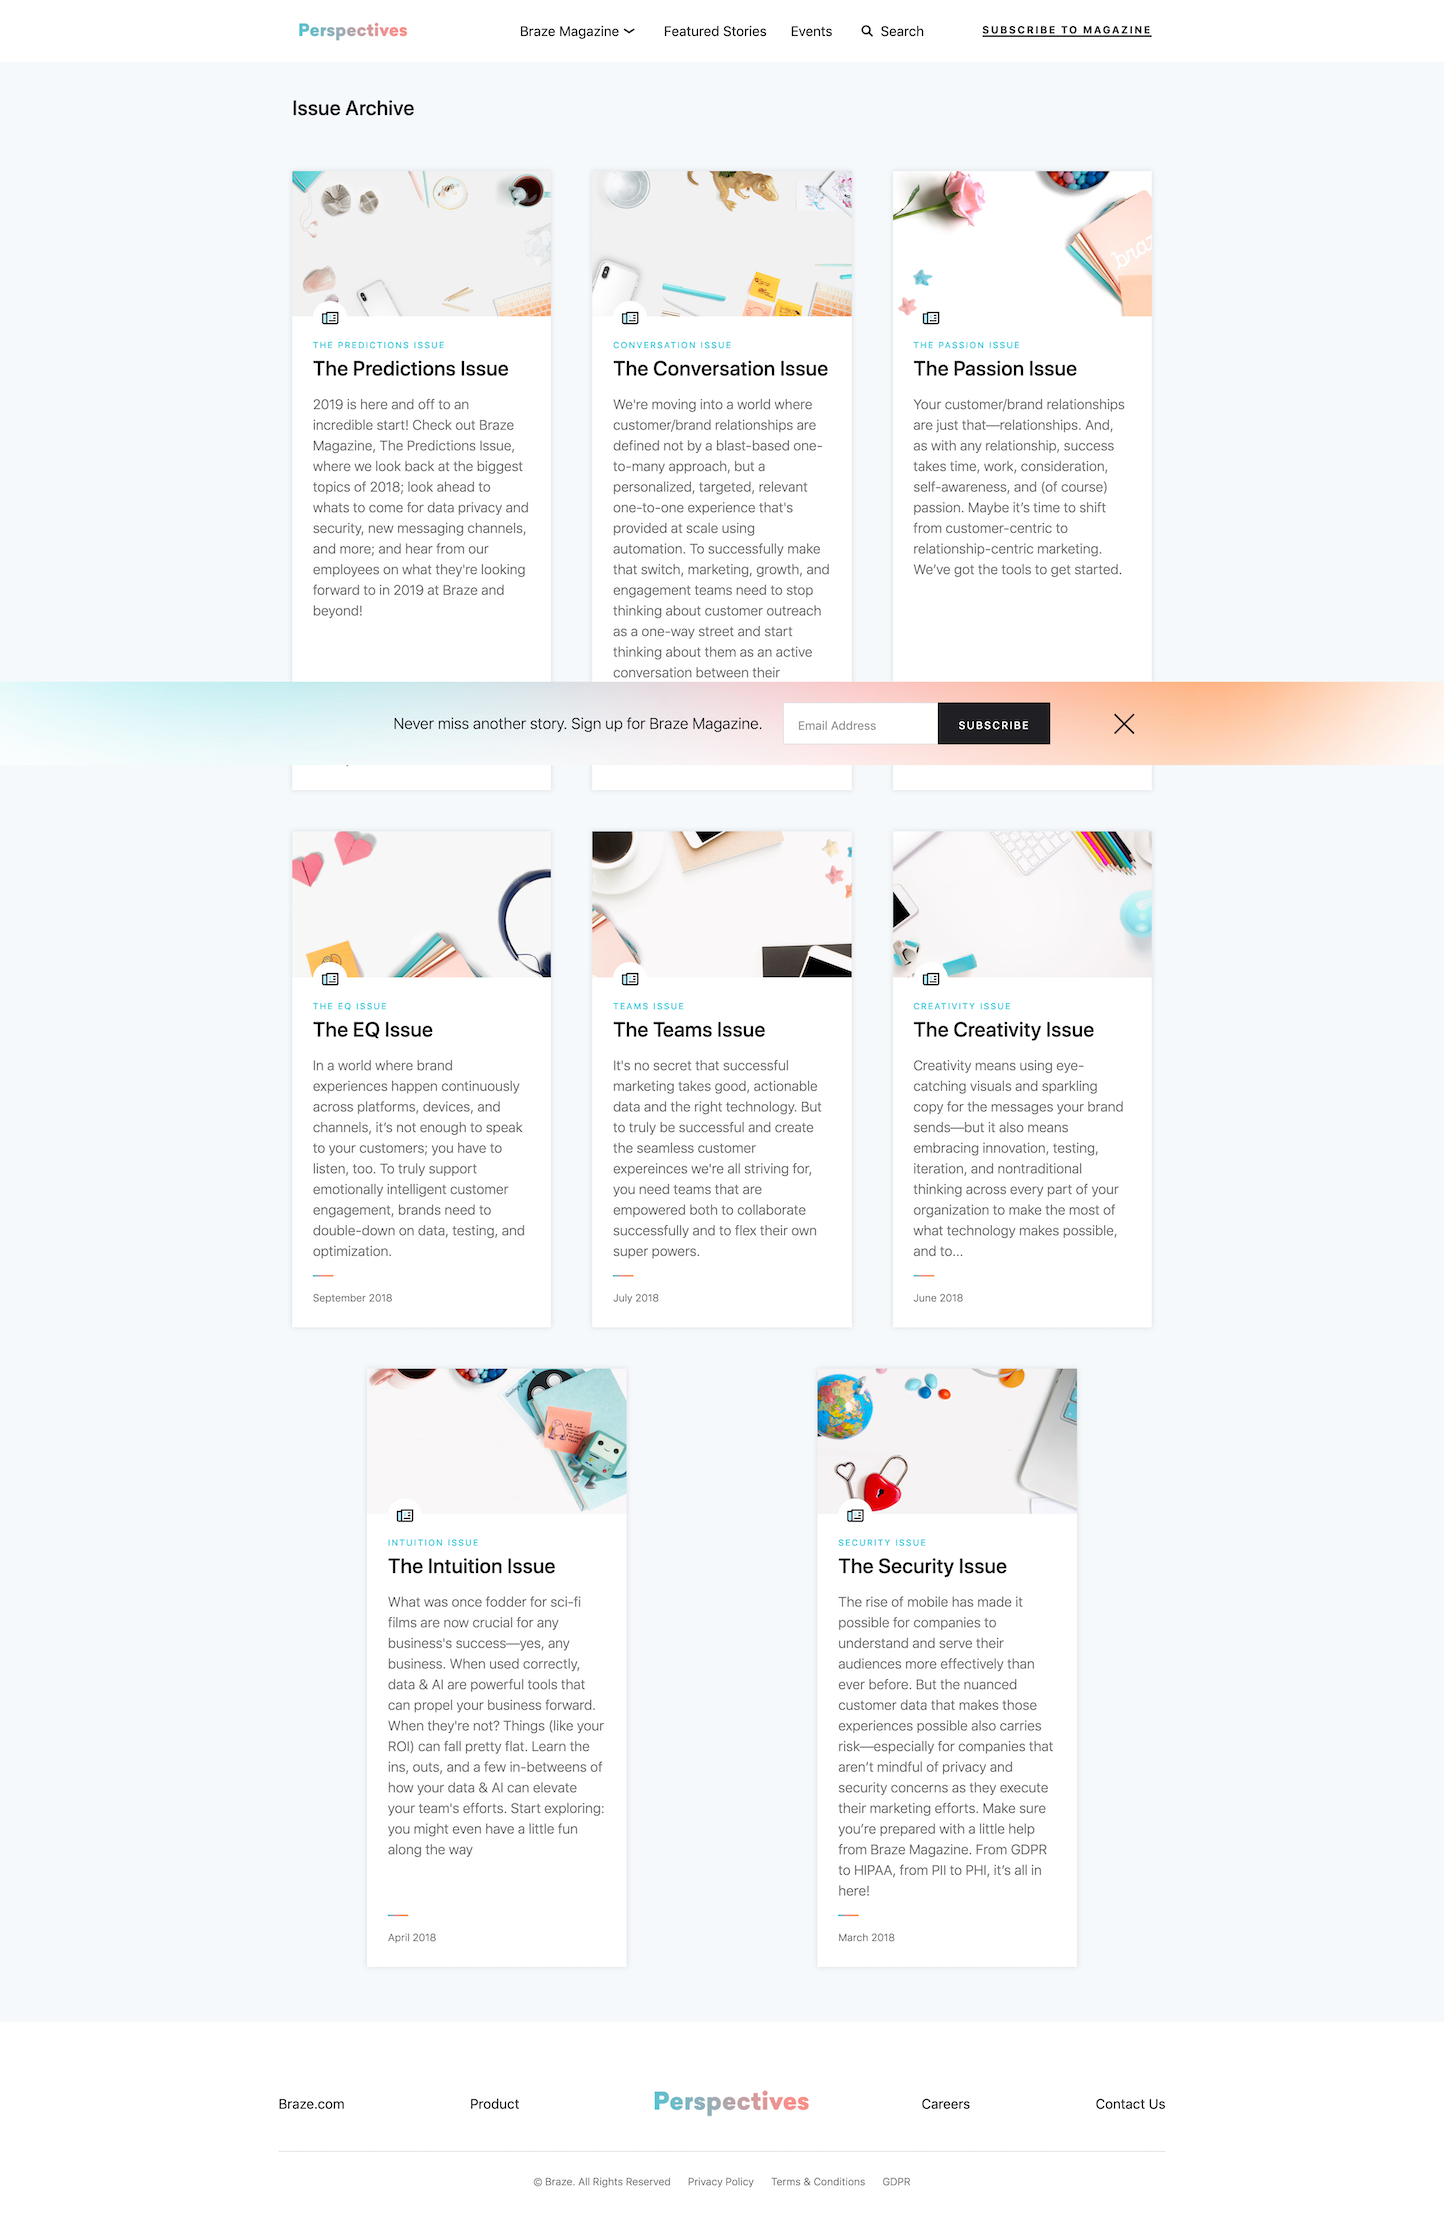 Screenshot of the Blog - Articles page from the Braze website.